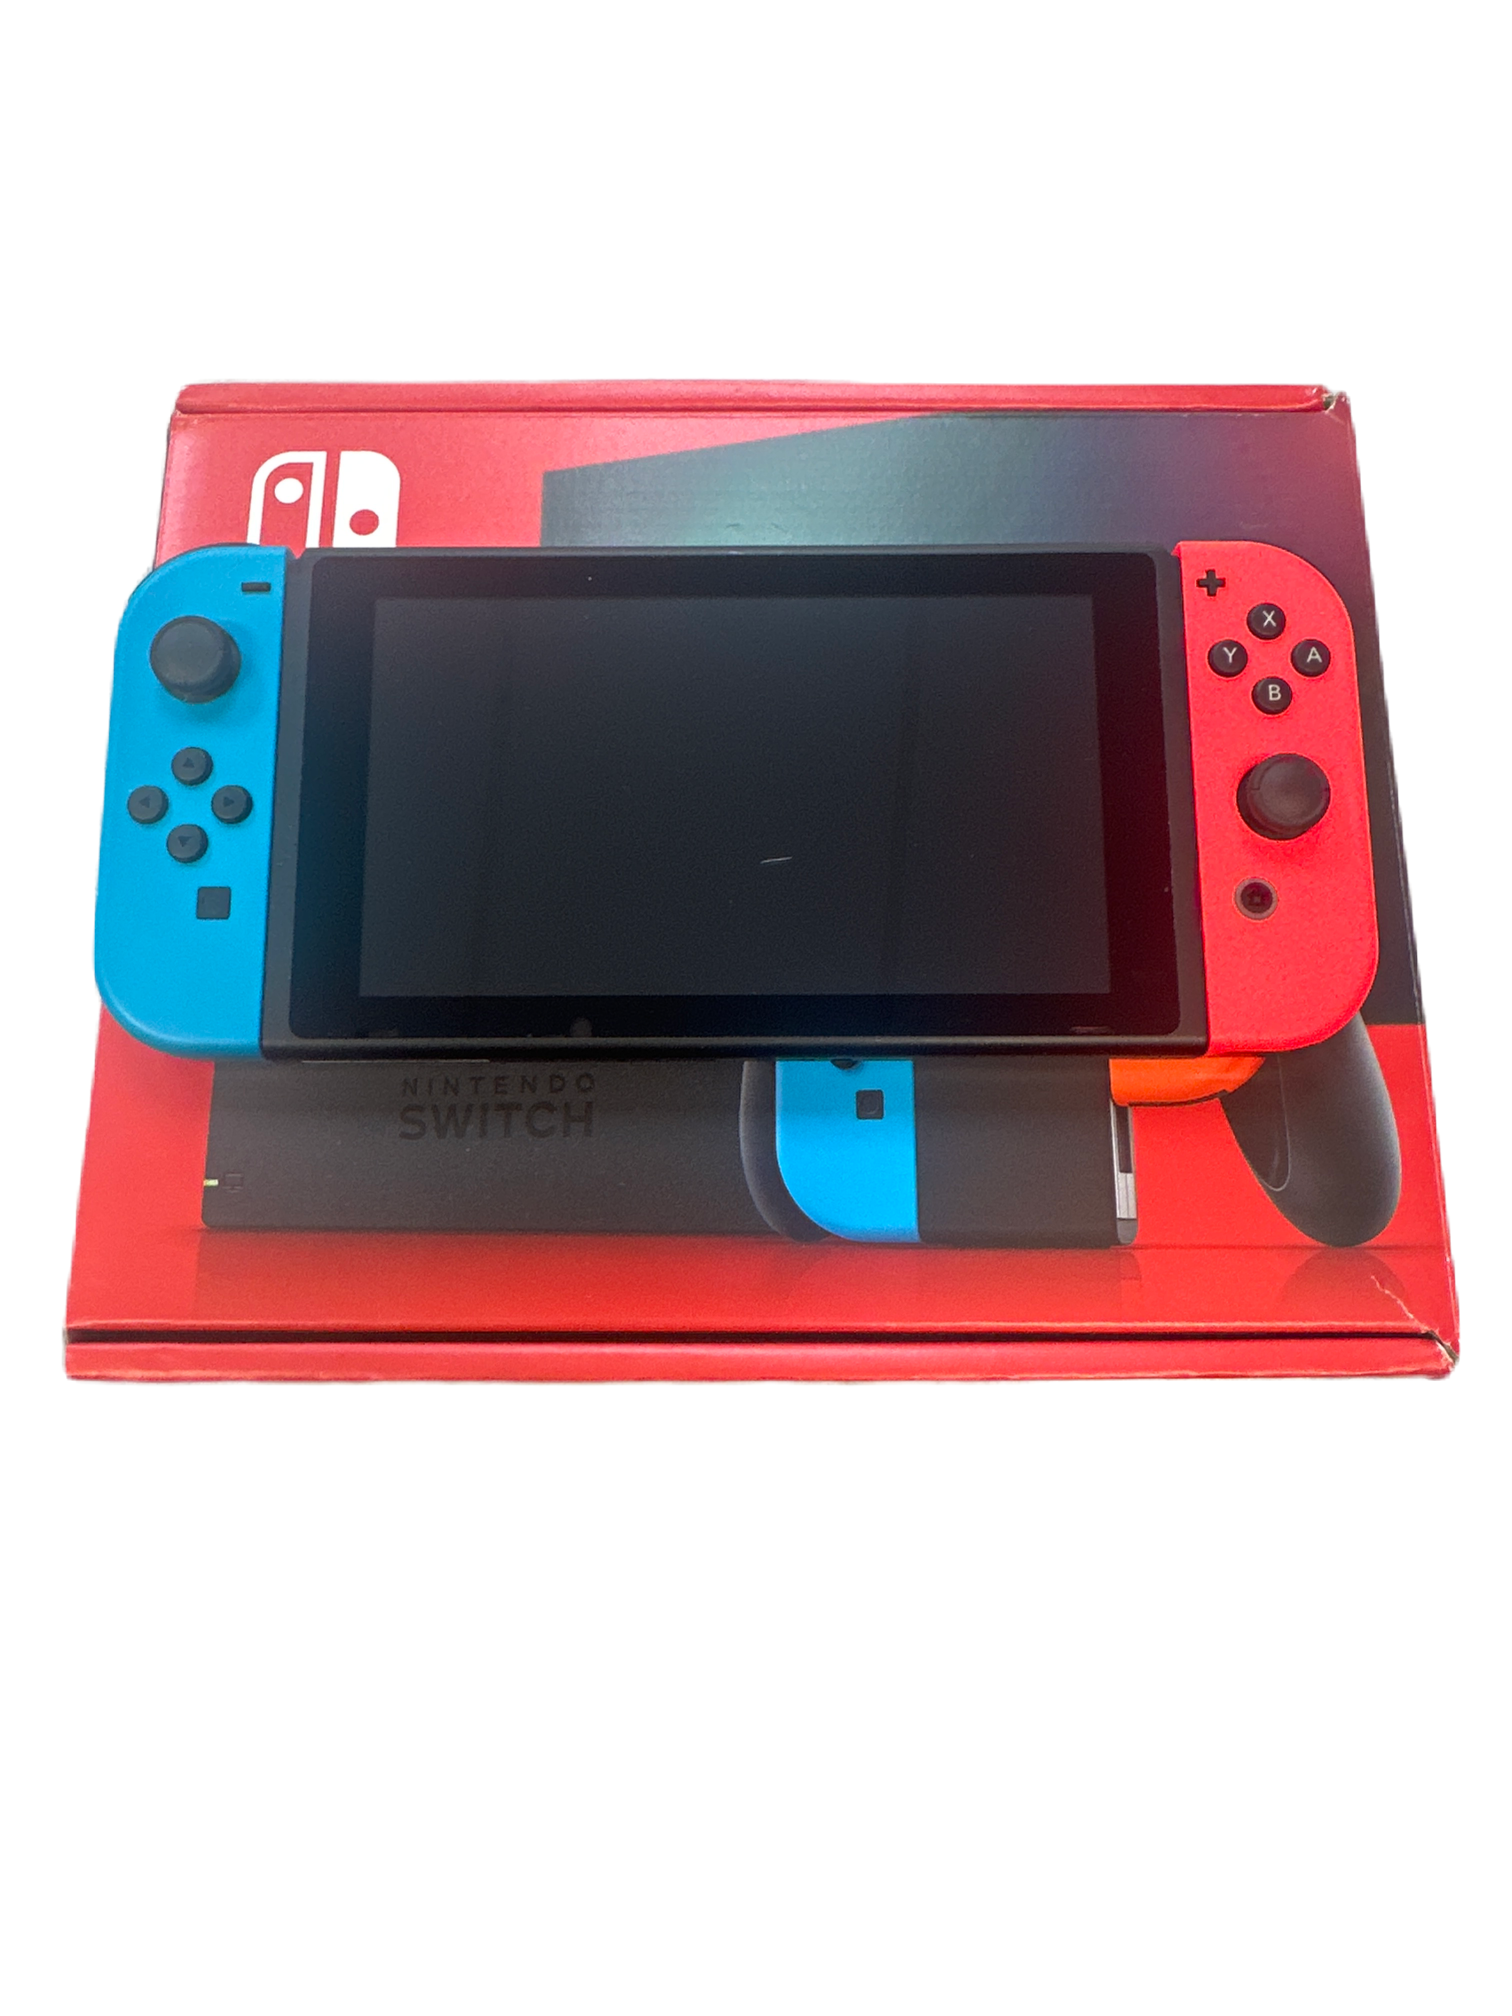 Nintendo Switch Console Boxed Neon Red/Blue Version